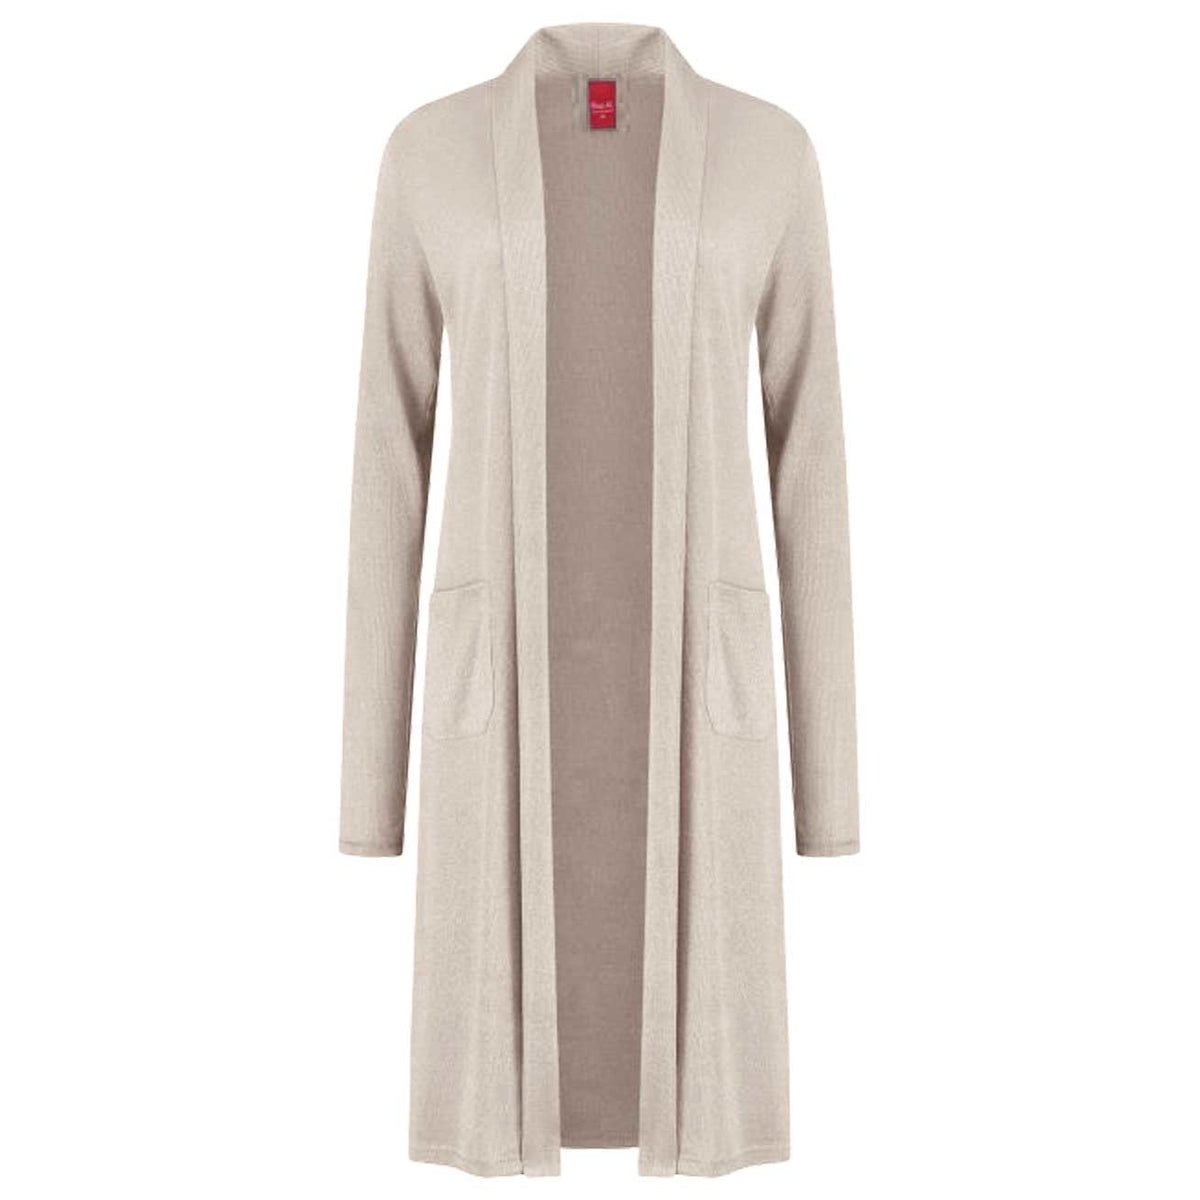 Only-M Cardigan Cashmere